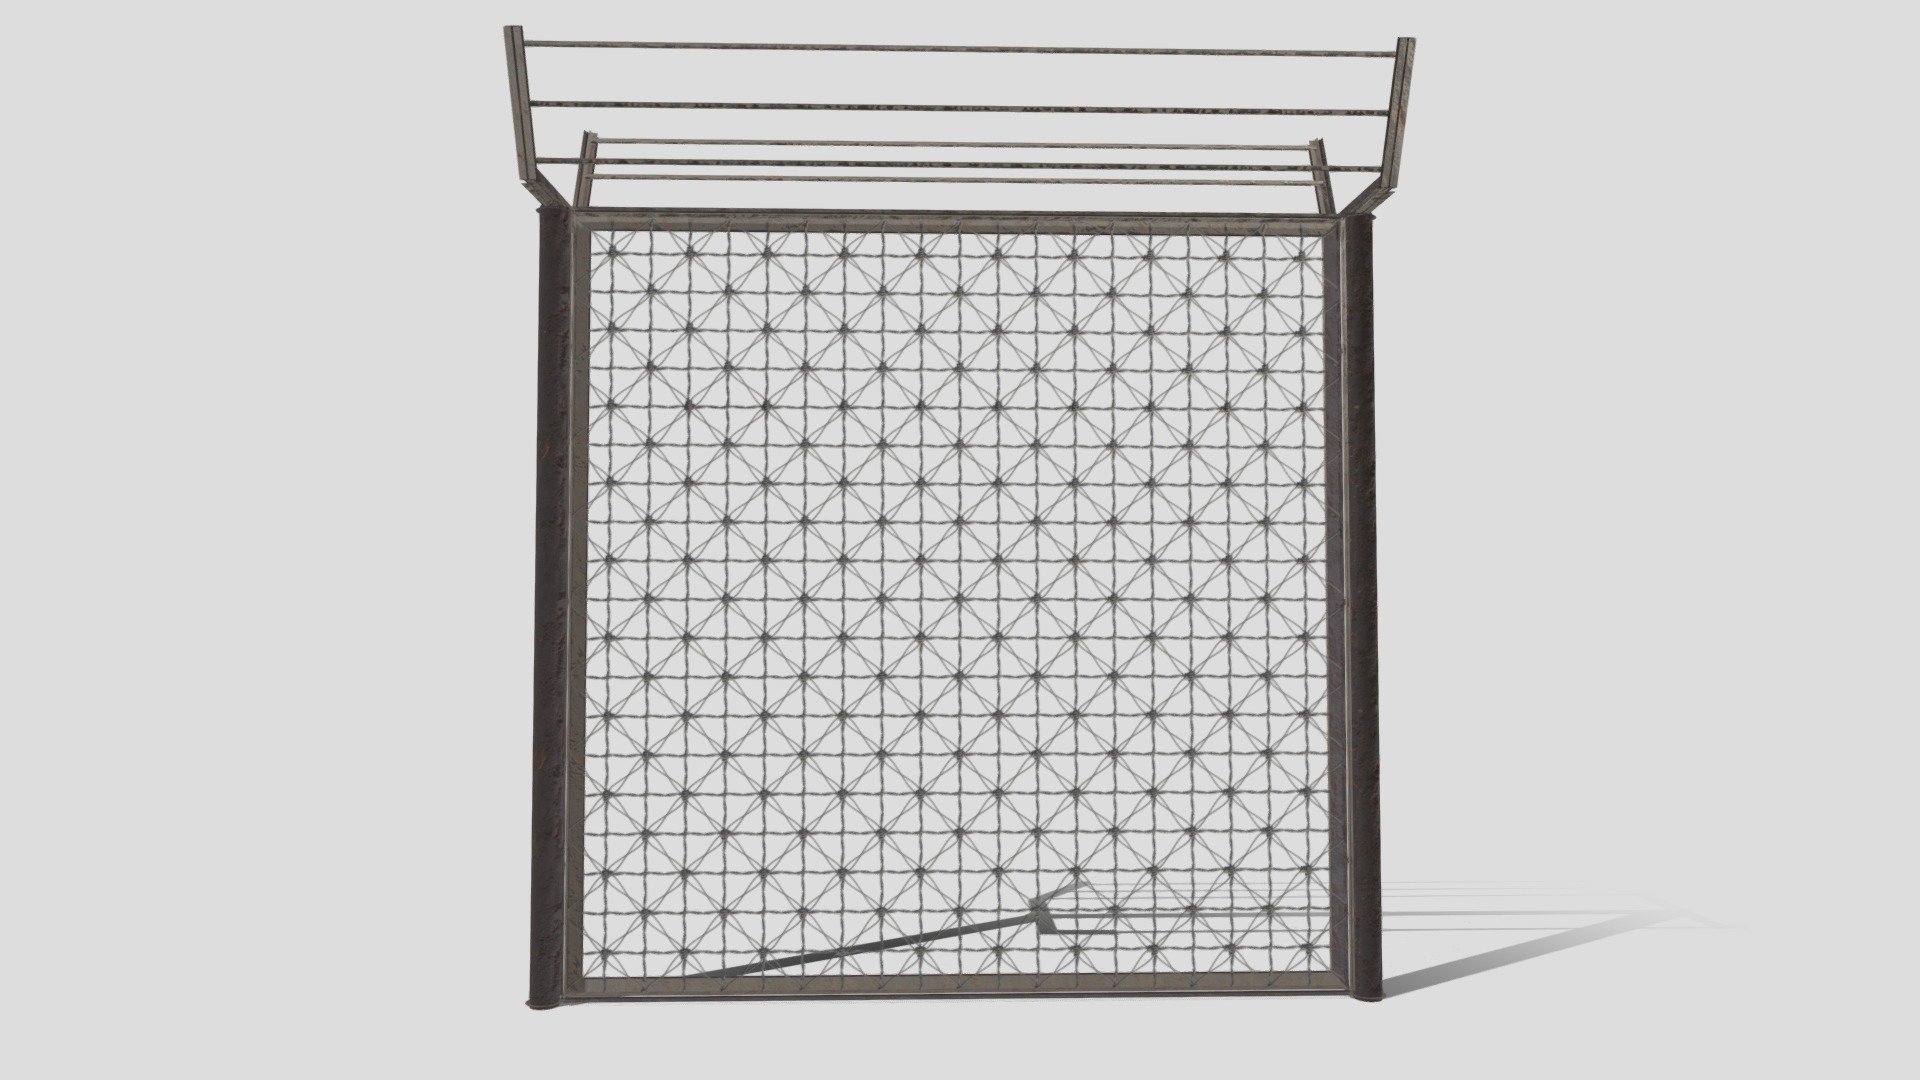 Fence model built in Blender and rendered with Cycles, with PBR materials, Game-Ready.
The model comes as a single segment which can be arrayed very easily. The actual fence part comes as a plane with texture, thus reducing the poly count very much.

File formats:
-.blend, rendered with cycles, as seen in the images;
-.obj, with materials applied and textures;
-.dae, with materials applied and textures;
-.fbx, with material slots applied;
-.stl;

3D Software:
This 3d model was originally created in Blender 2.79 and rendered with Cycles, importing the model into other programs might require very simple material adjustments to look like in Blender.

Materials and textures:
Materials and textures made in Substance Painter (PBR Workflow).
The model has materials applied in all formats, and is ready to import and render .
The model comes with multiple png image textures 3d model